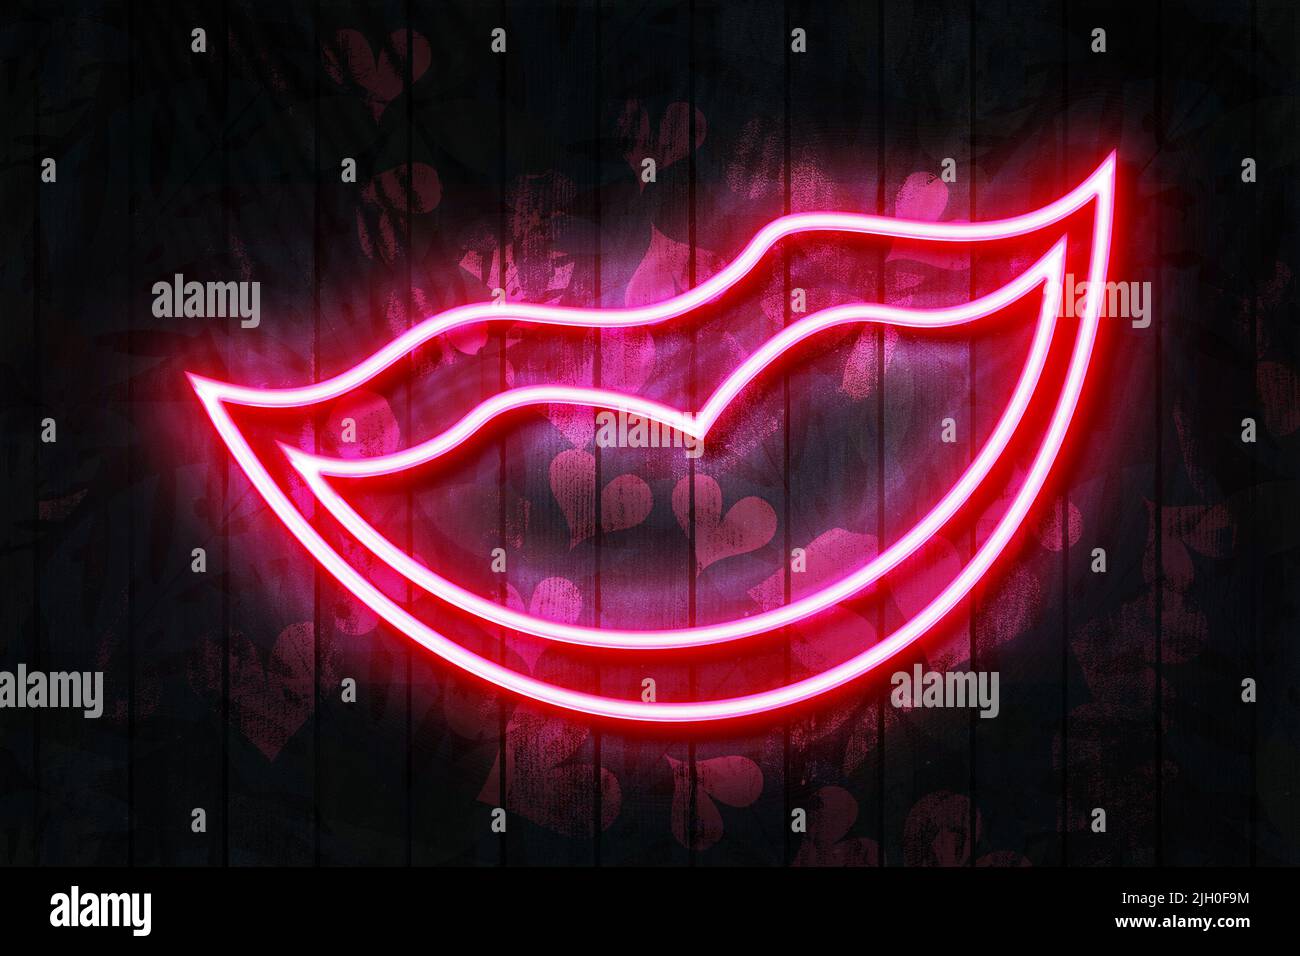 Lips neon sign on a Dark Wooden Wall 3D illustration with red heart background. Stock Photo